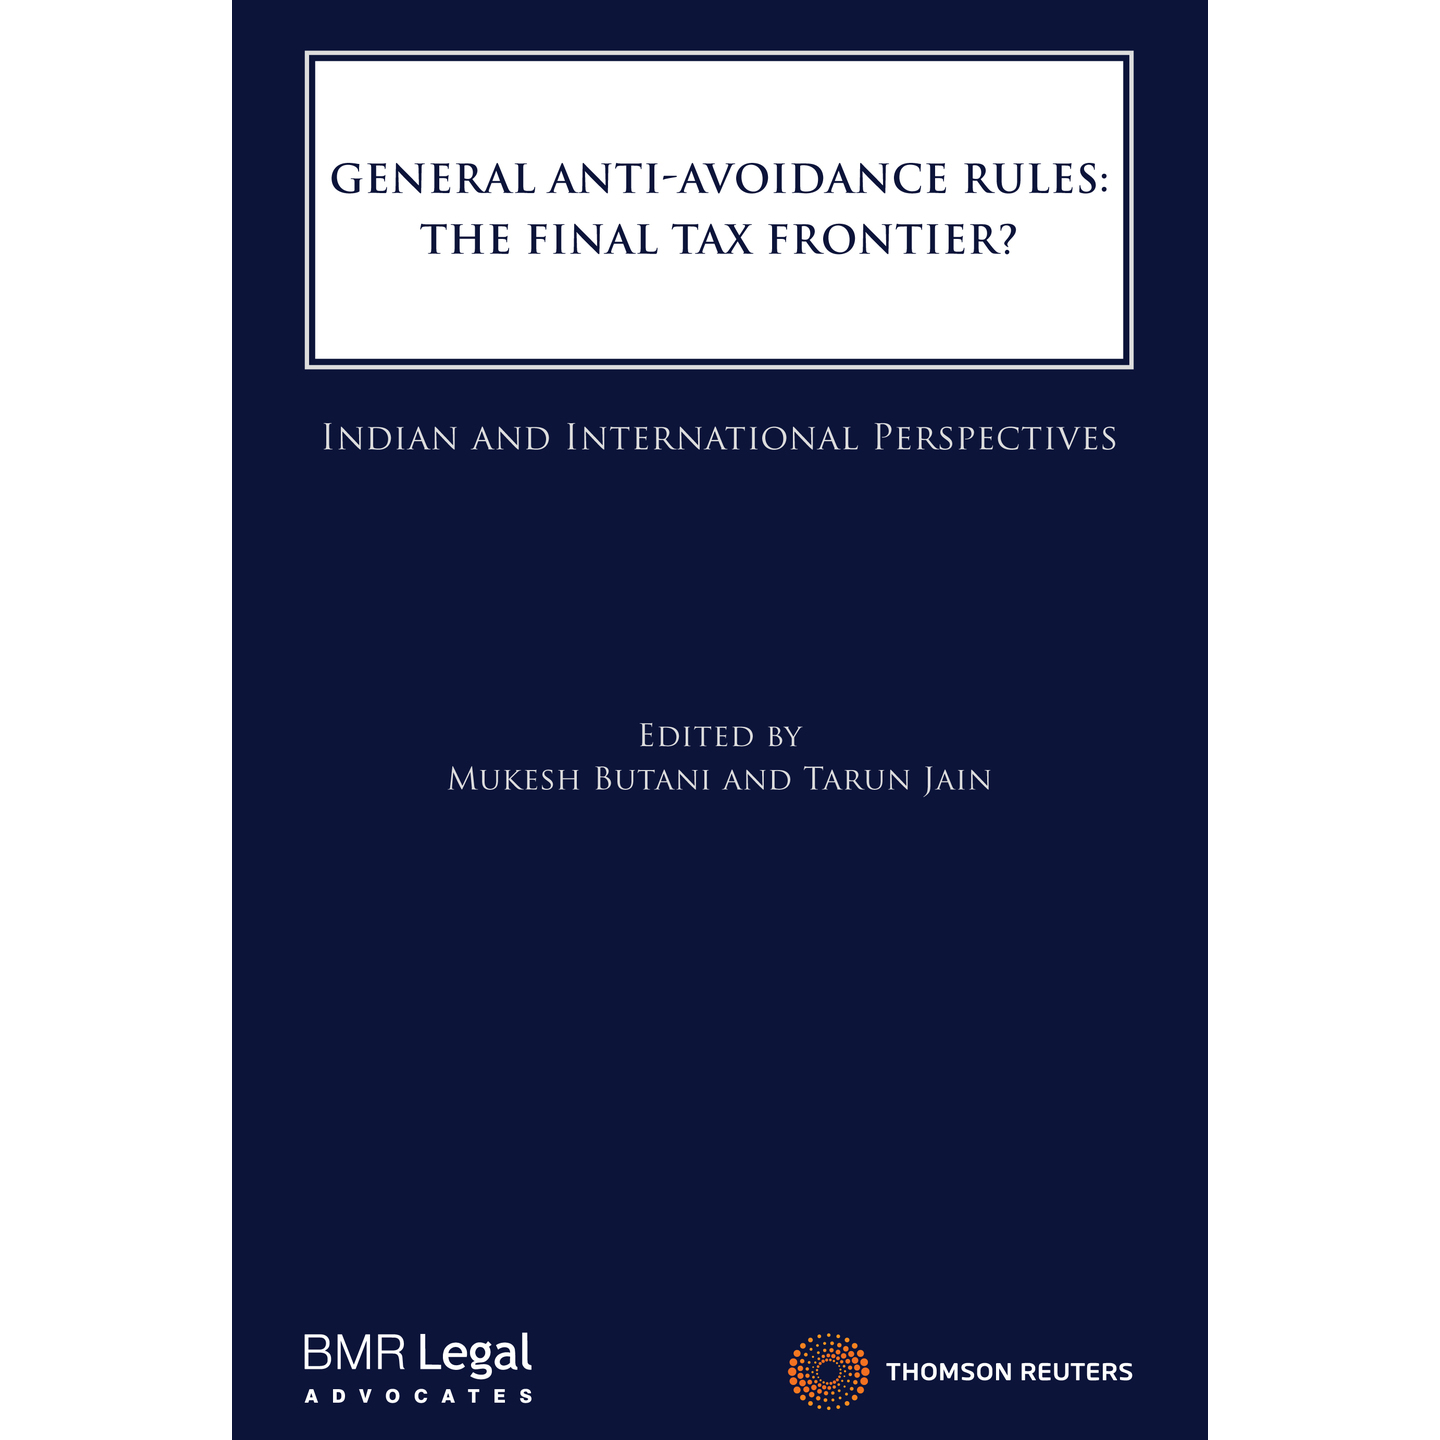 General Anti-Avoidance Rules: The Final Tax Frontier?